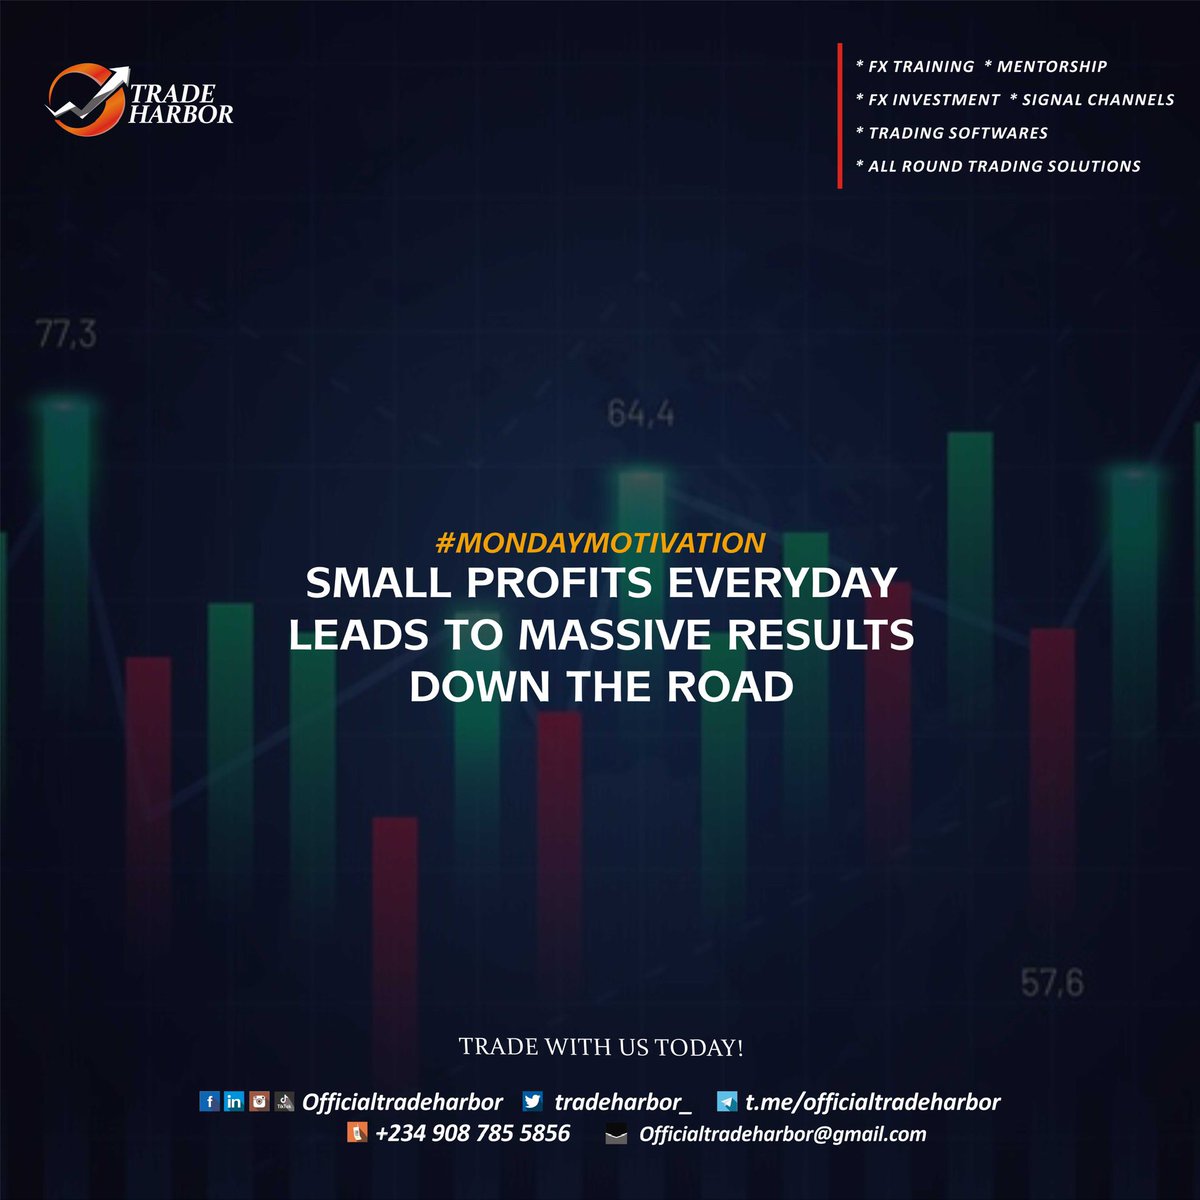 Don't relent! 📊💰

#ForexTrading #CurrencyMarkets #ForexAnalysis #FXSignals #TradingStrategy #ForexNews #CurrencyPairs #FXMarket #TradingTips #ForexCommunity #justdoit #profits